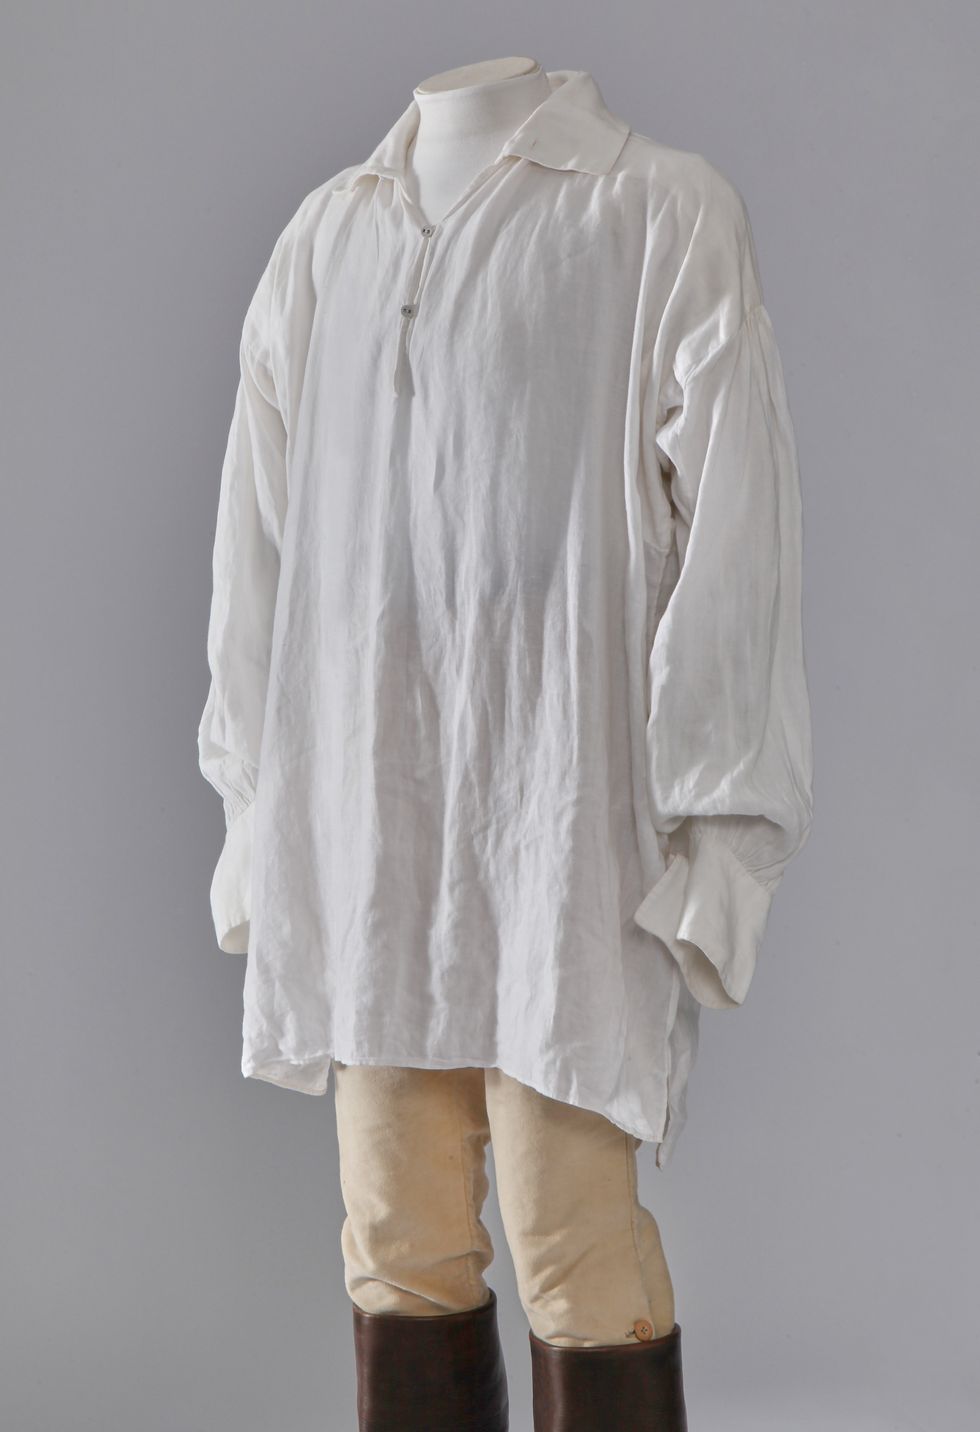 Colin Firth’s lake-soaked Mr Darcy shirt from Pride And Prejudice sold for £20k